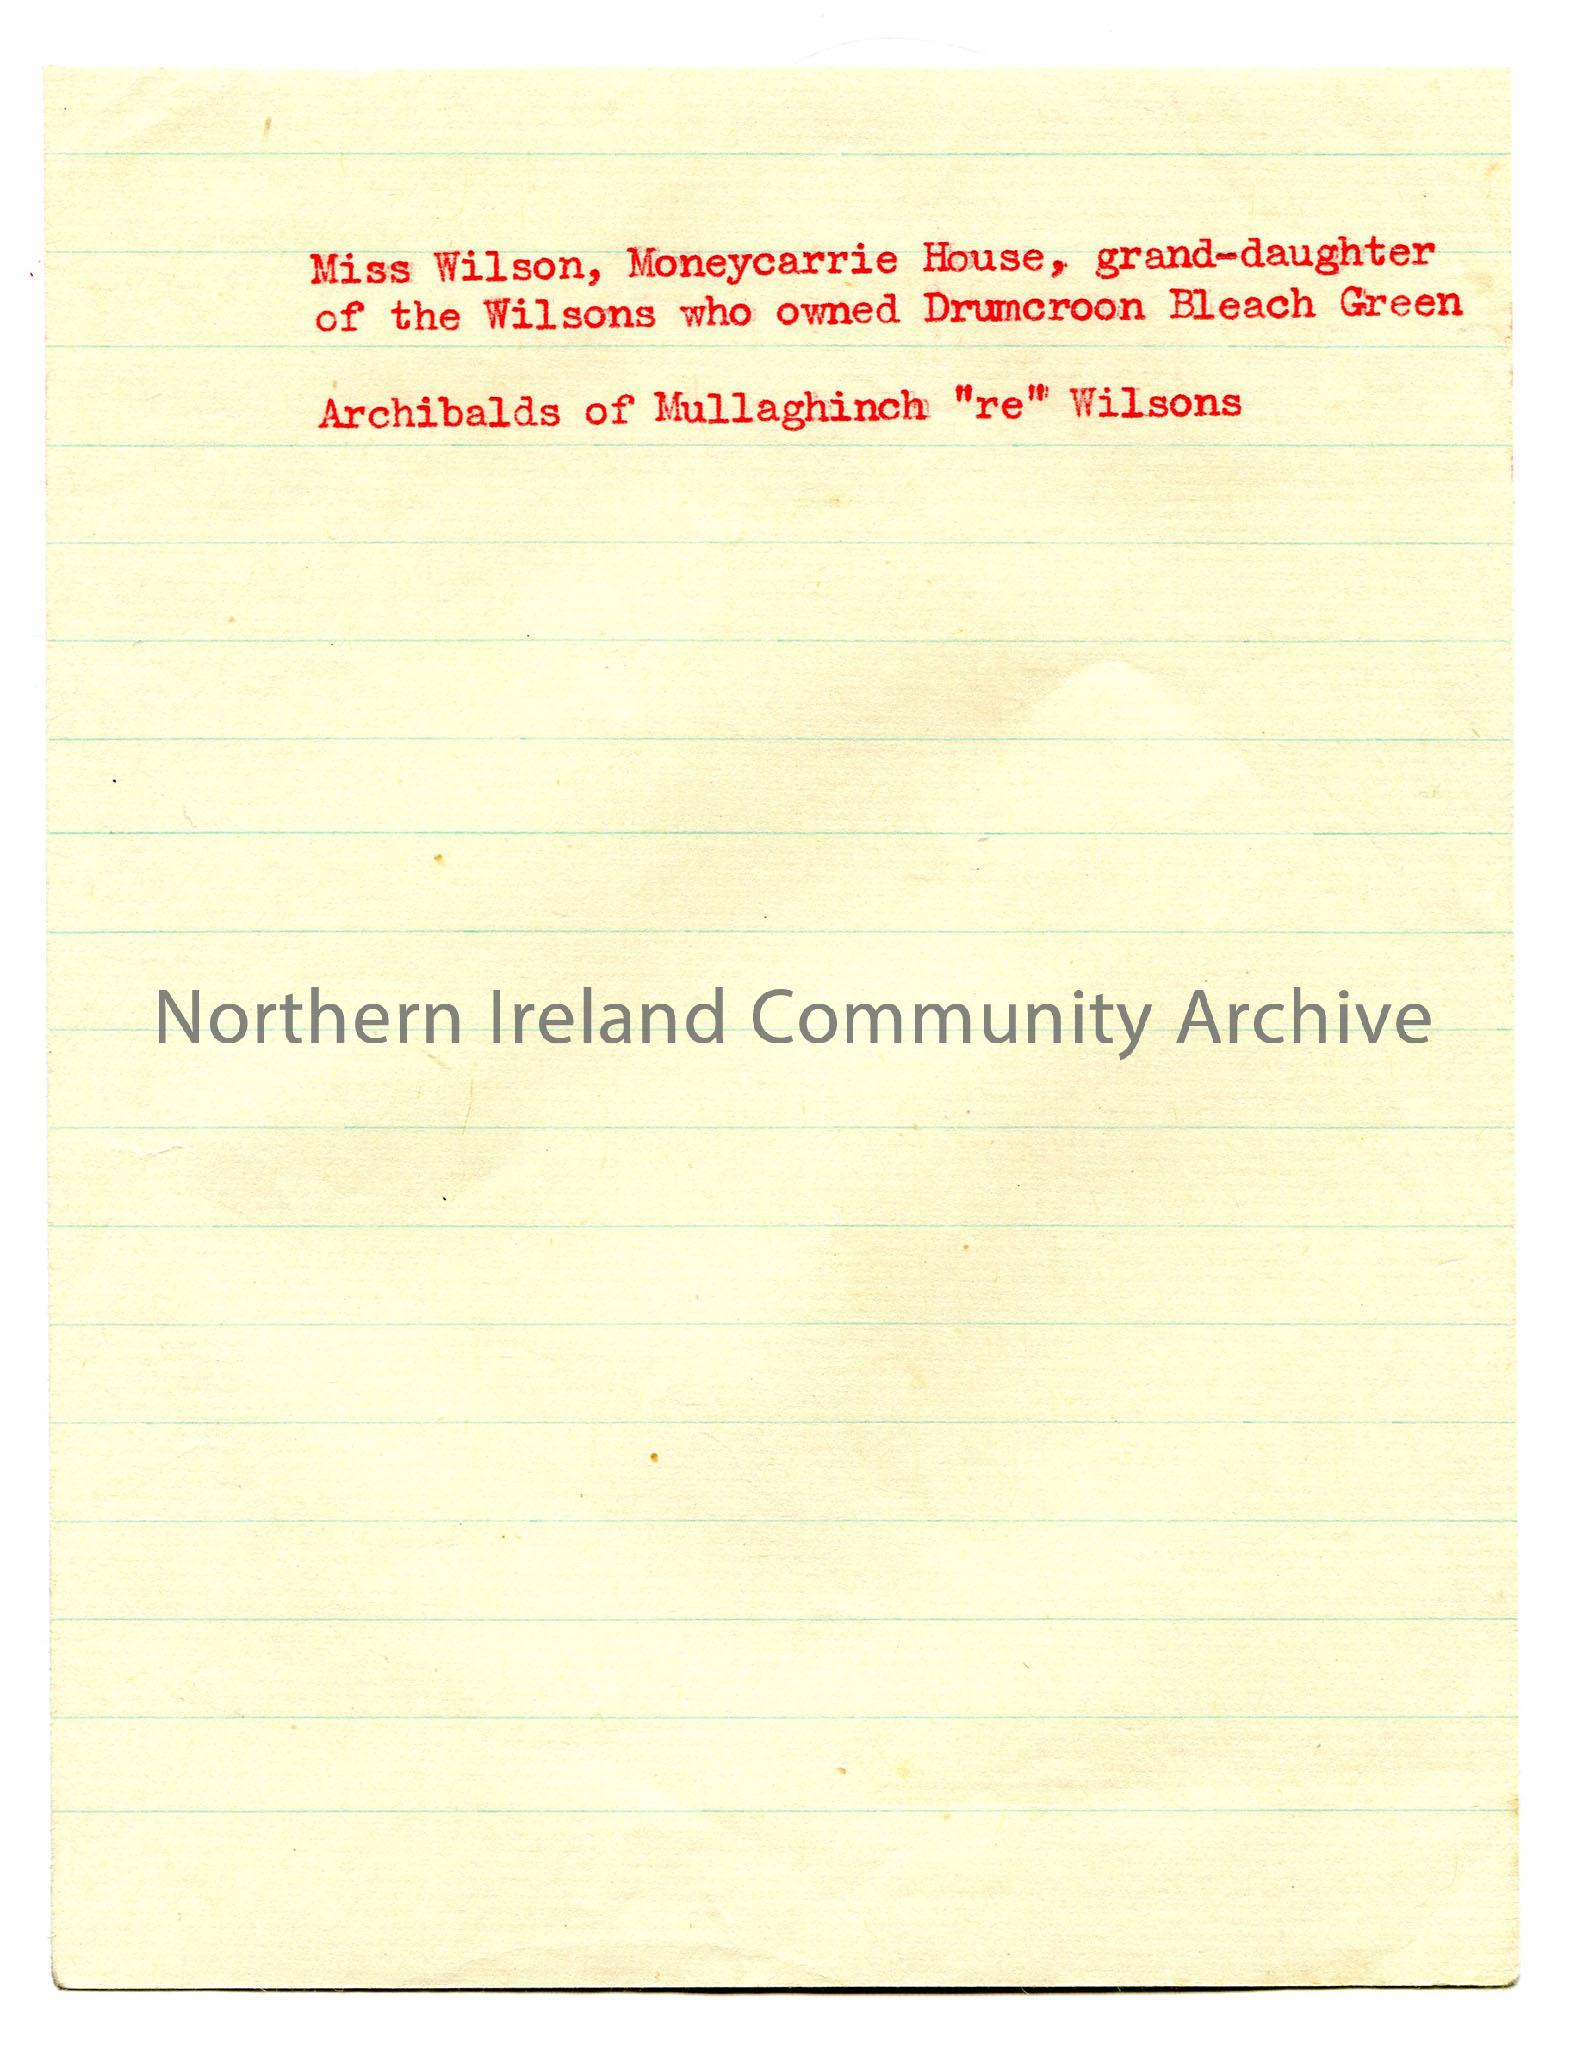 Typed notes re Wilson family, of genealogical interest.